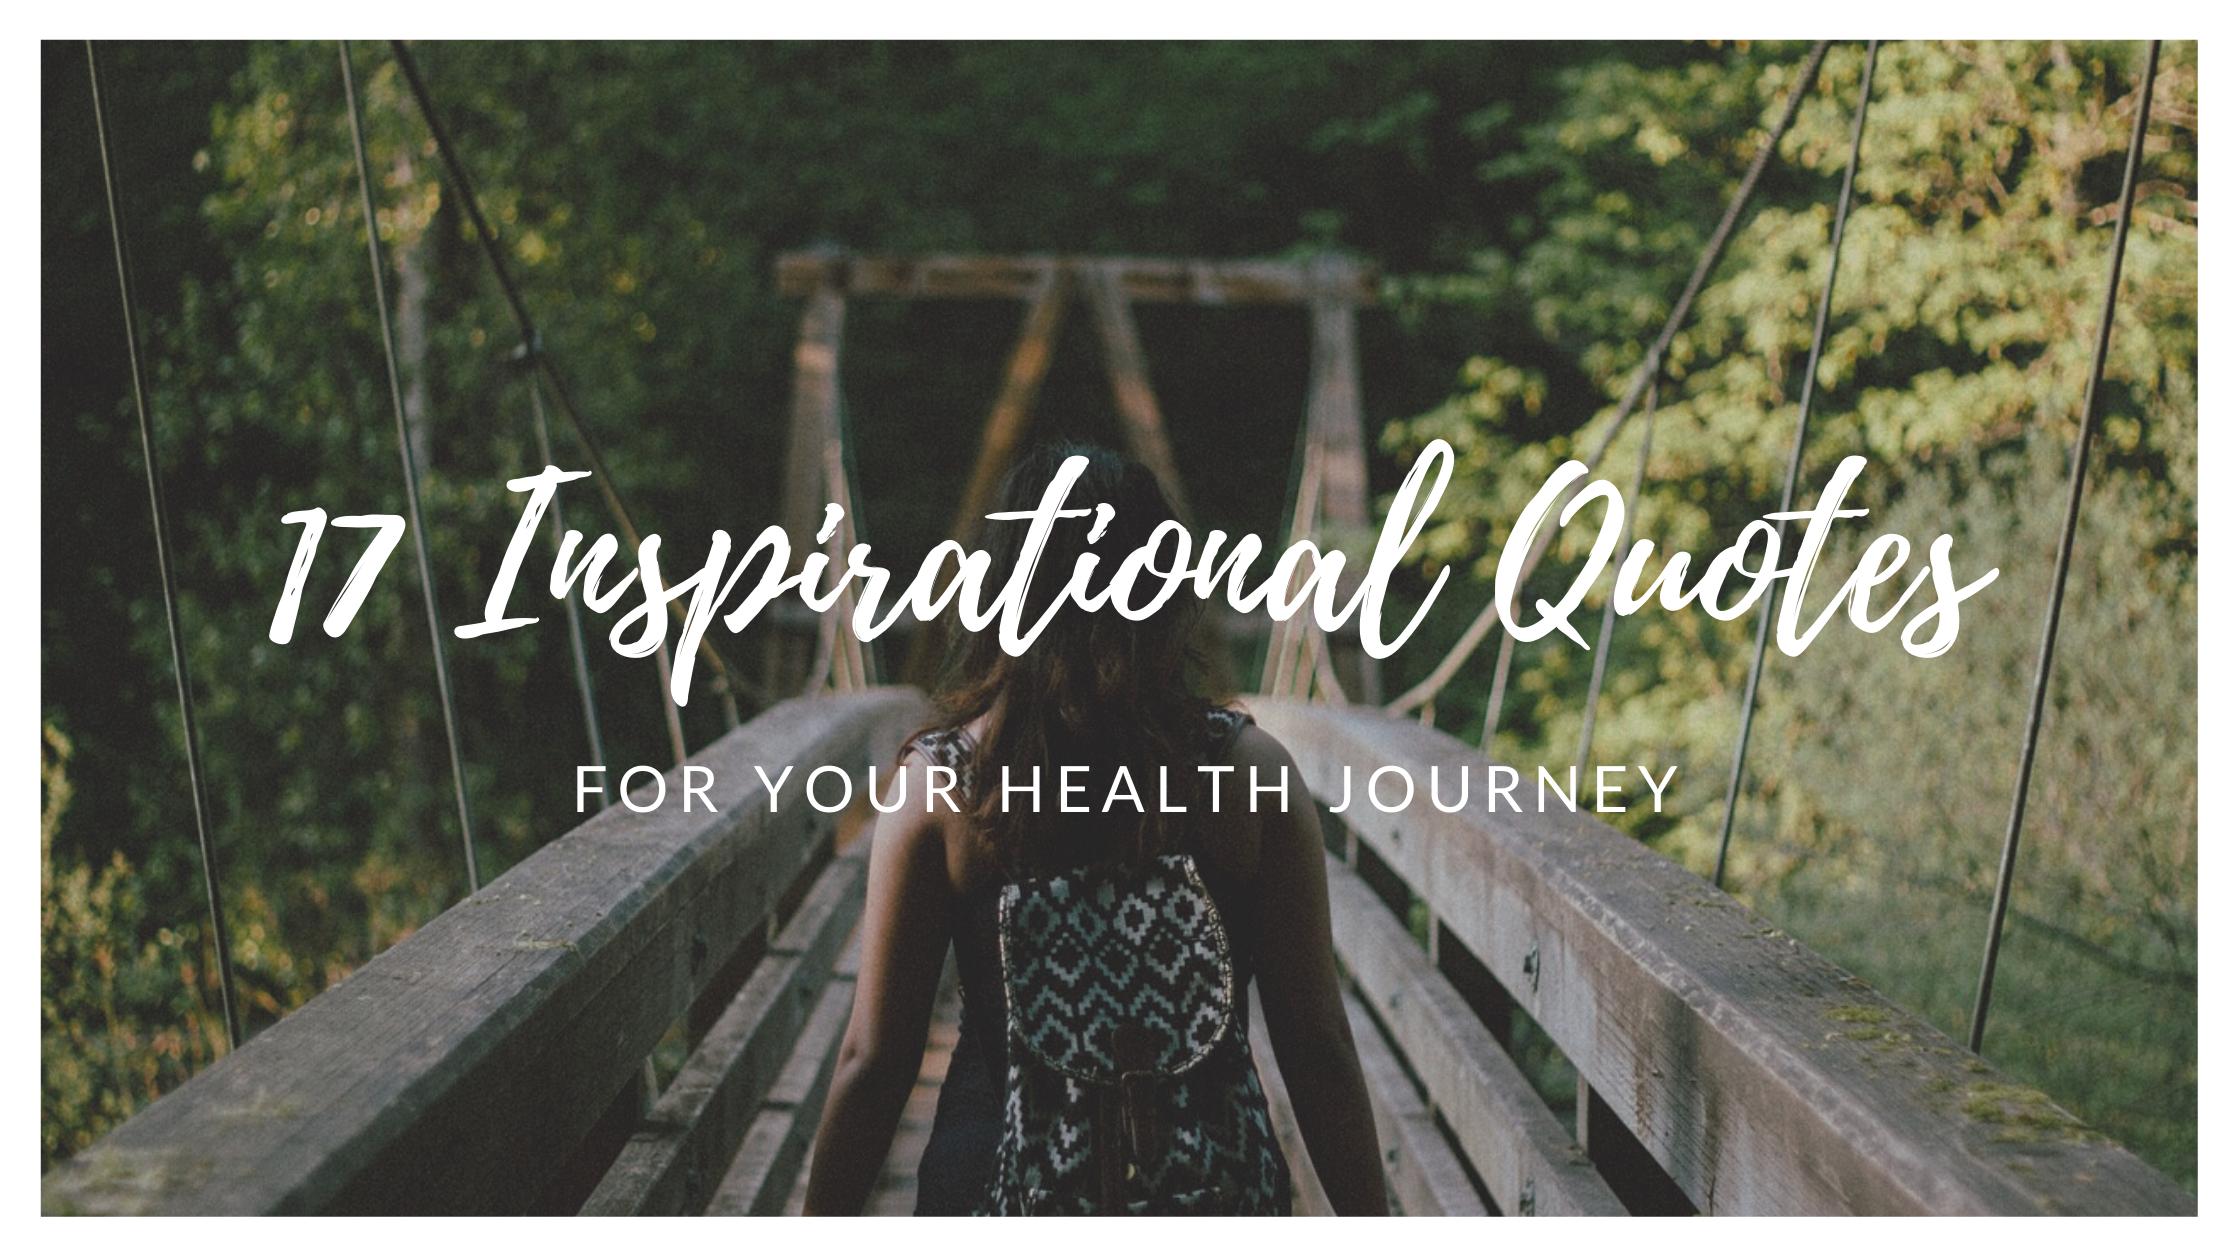 quotes about health journey